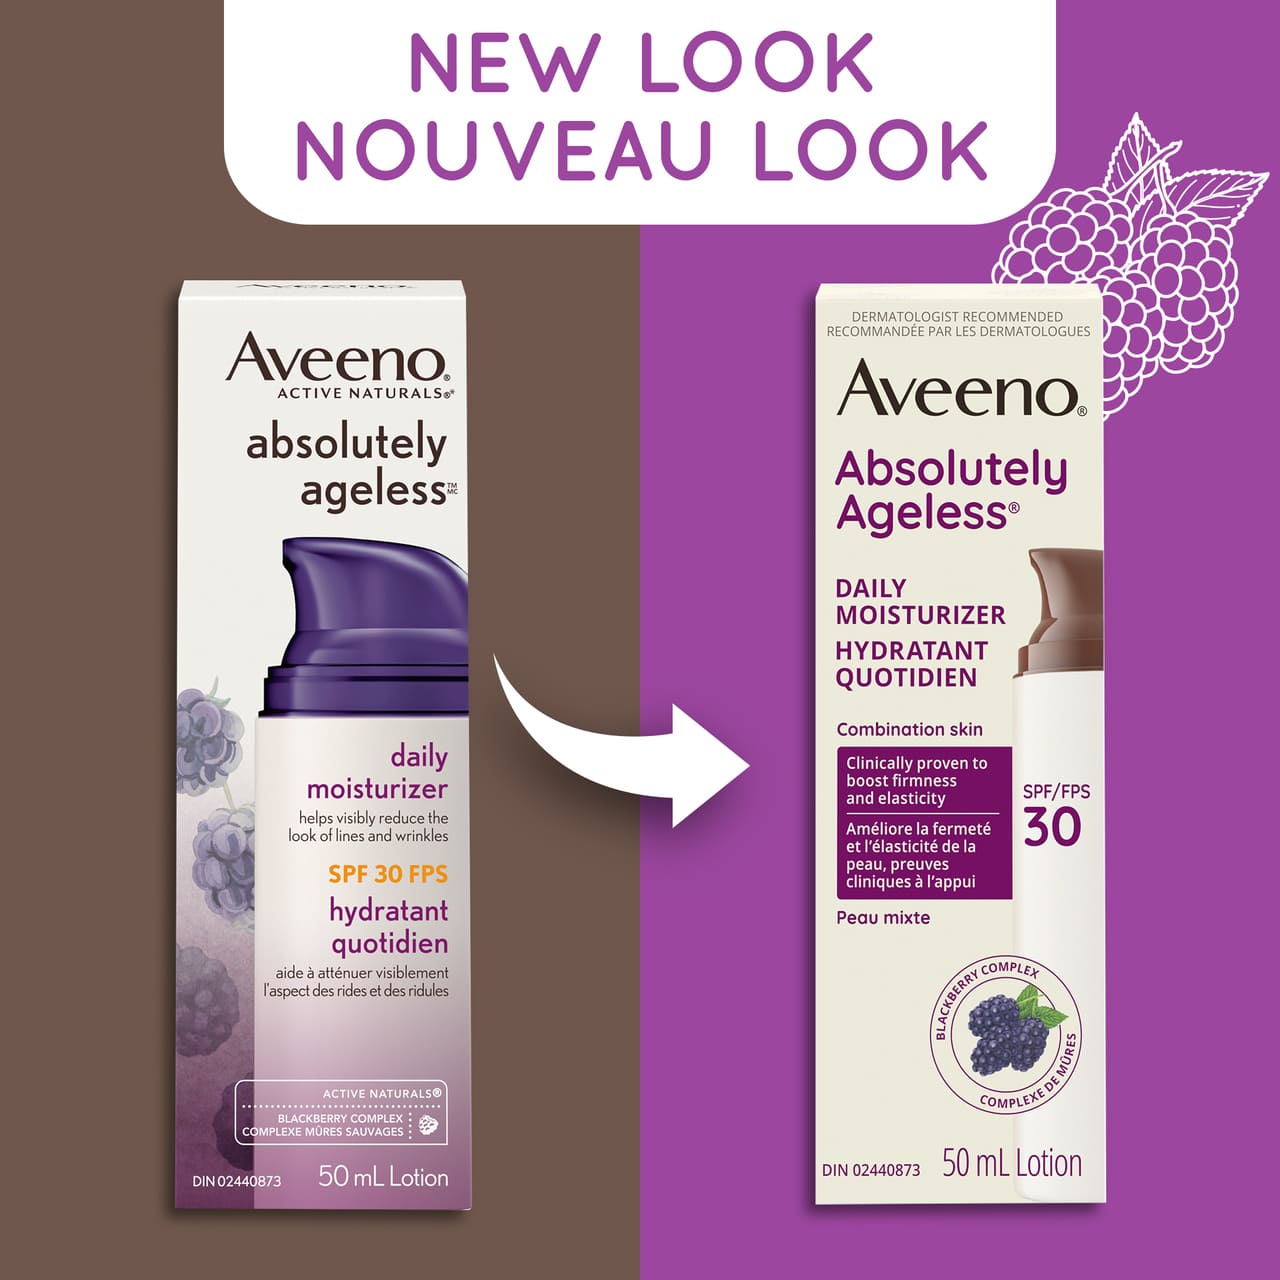 Old and new packaging of AVEENO® Absolutely Ageless Daily Moisturizer SPF 30, 50 mL bottles, with text 'new look'